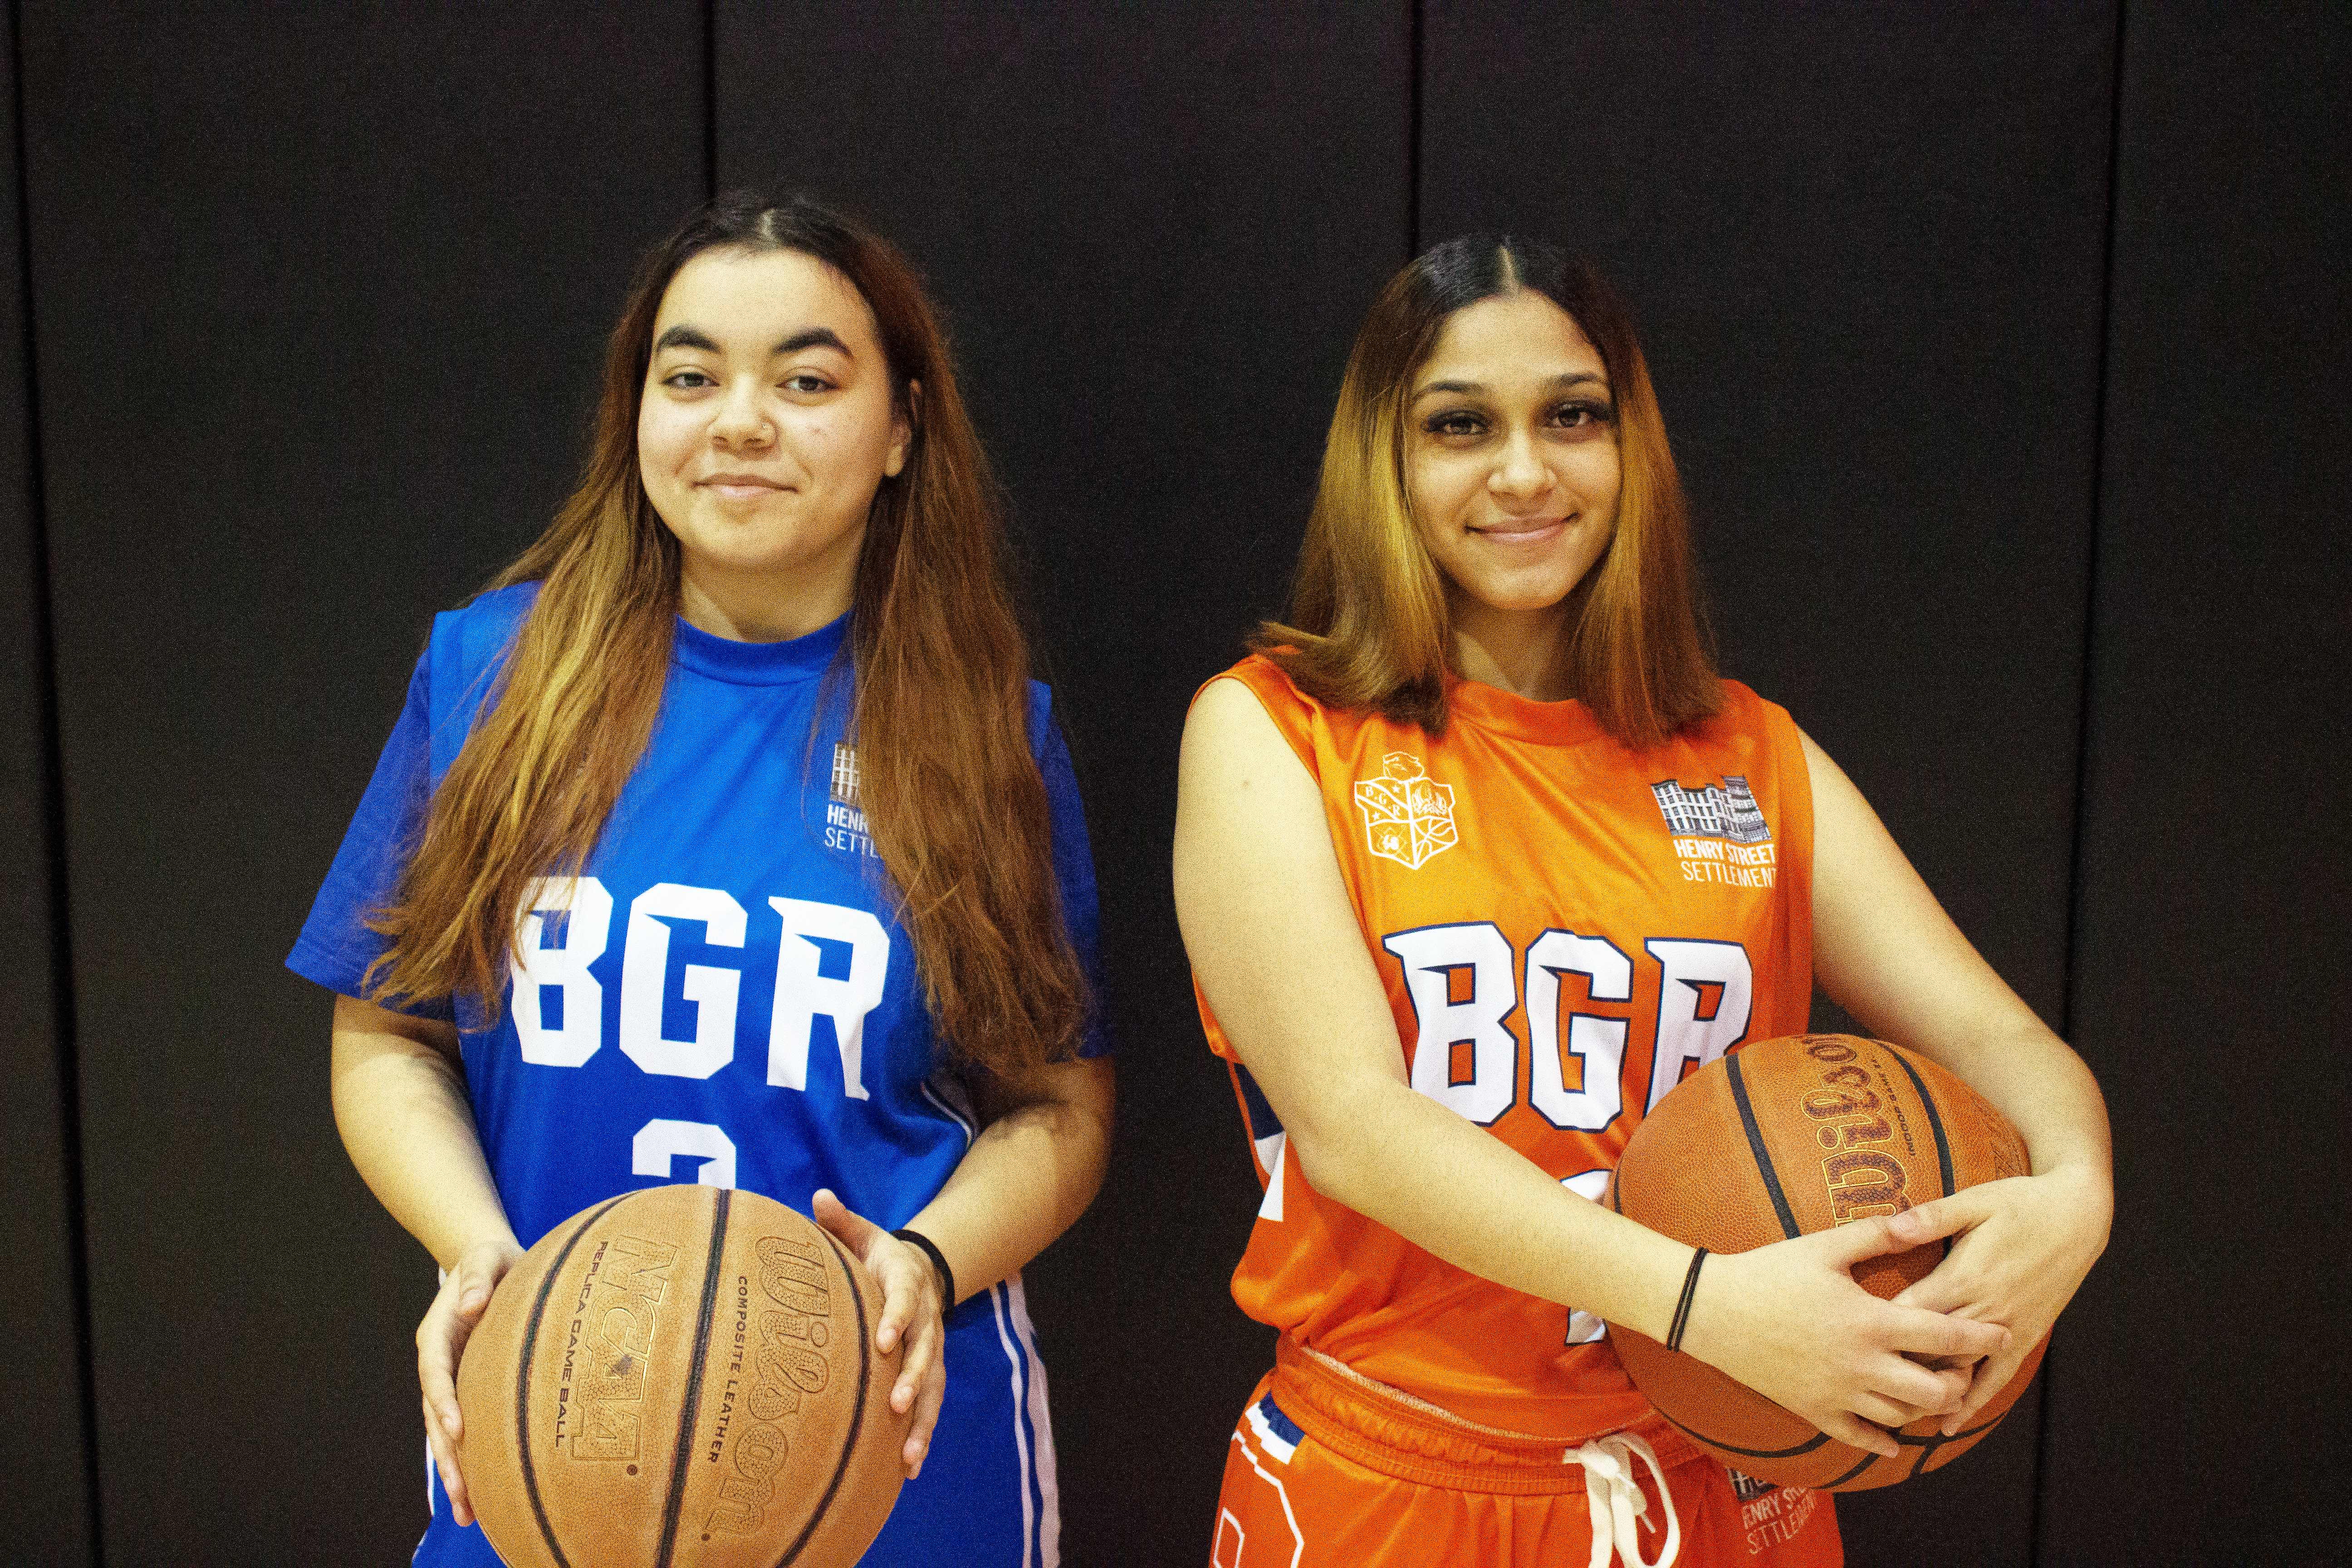 Two teen girls wearing uniforms and holding basketballs